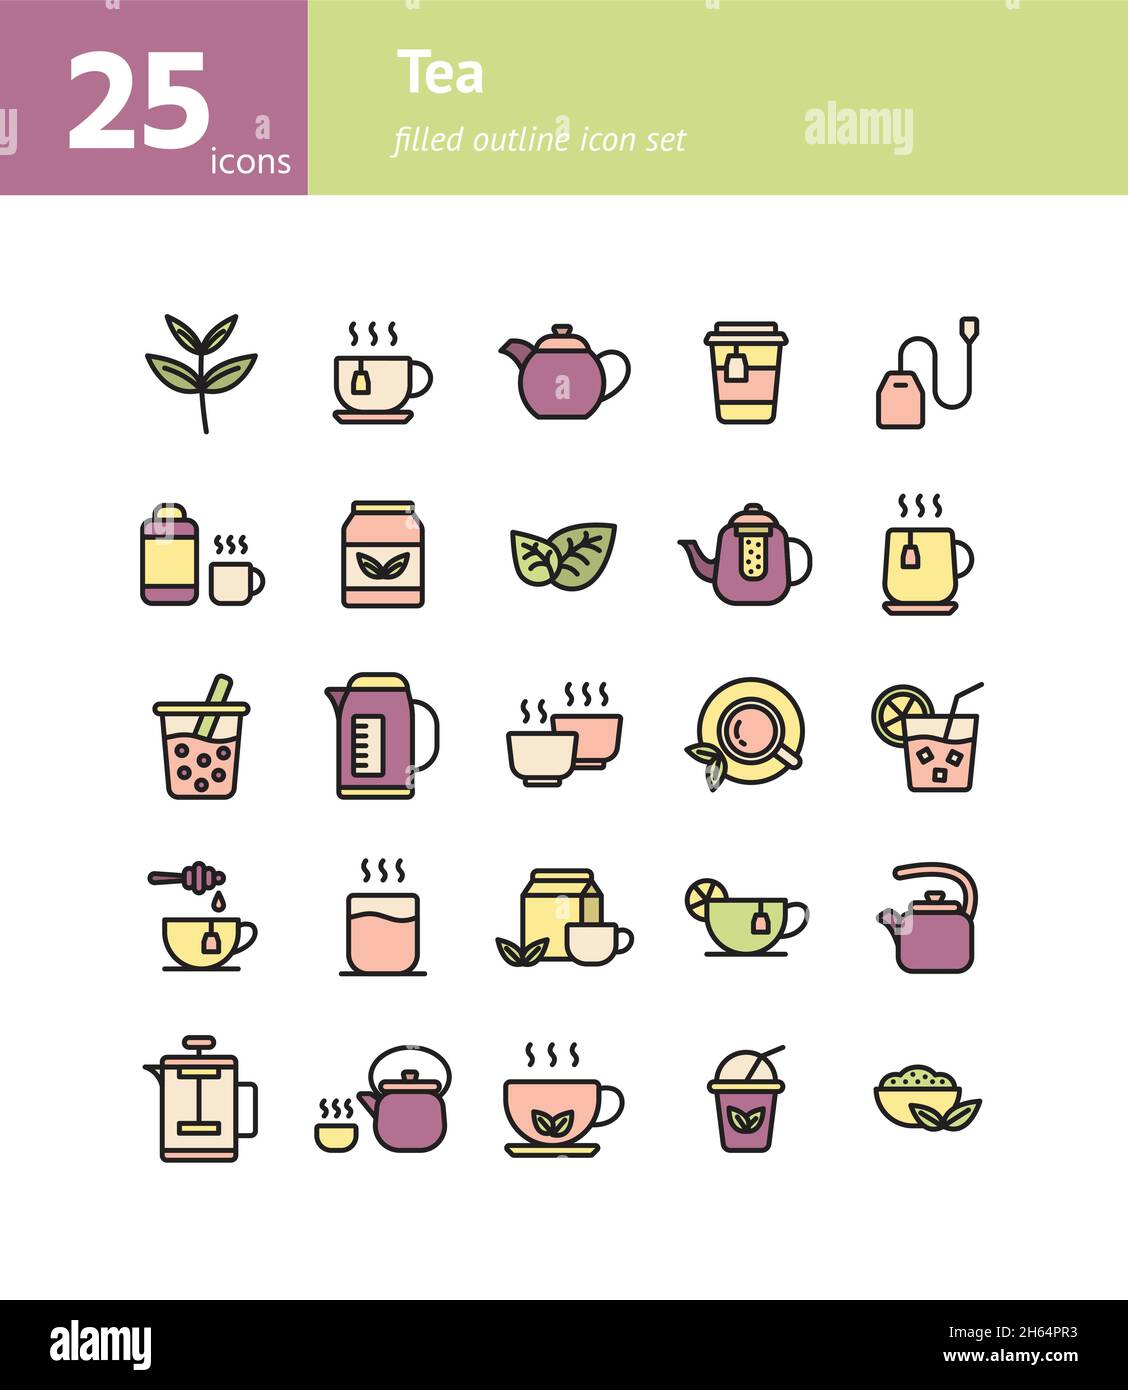 Tea filled outline icon set. Vector and Illustration. Stock Vector